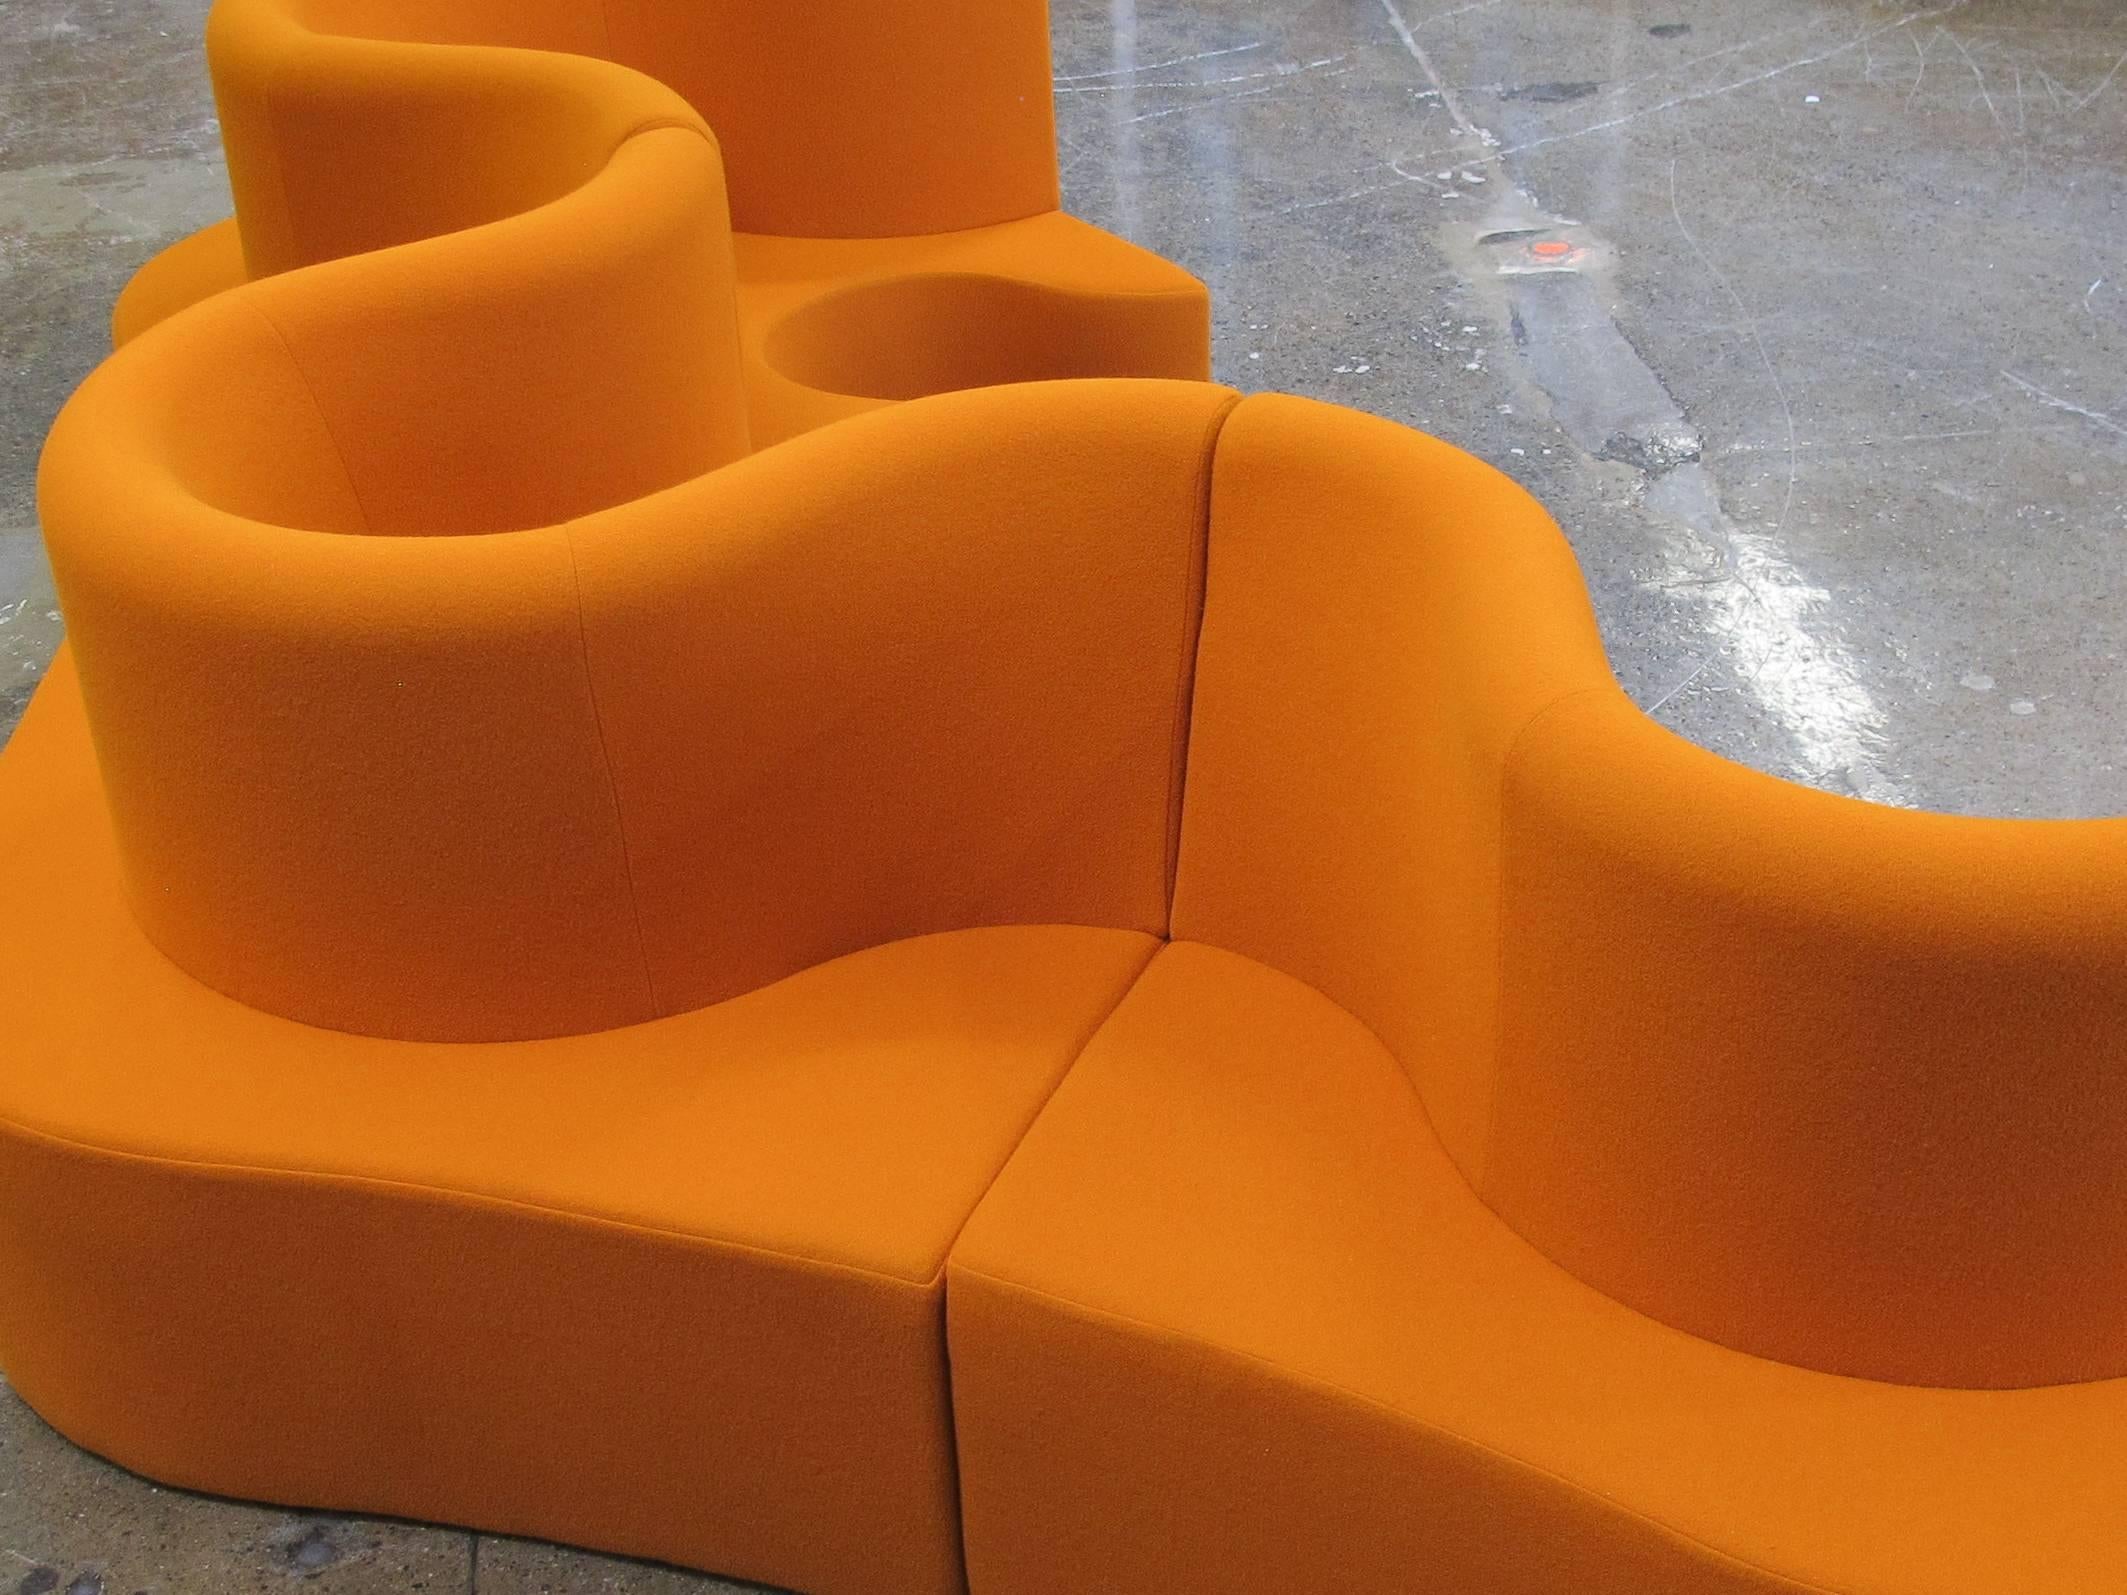 Cloverleaf modular sofa in three connected sections designed by Verner Panton, 1969. A curvy backrest provides comfortable seating on both sides of the sofa's dynamic form. Perfect for an open floor plan in a private or public space. Upholstered in